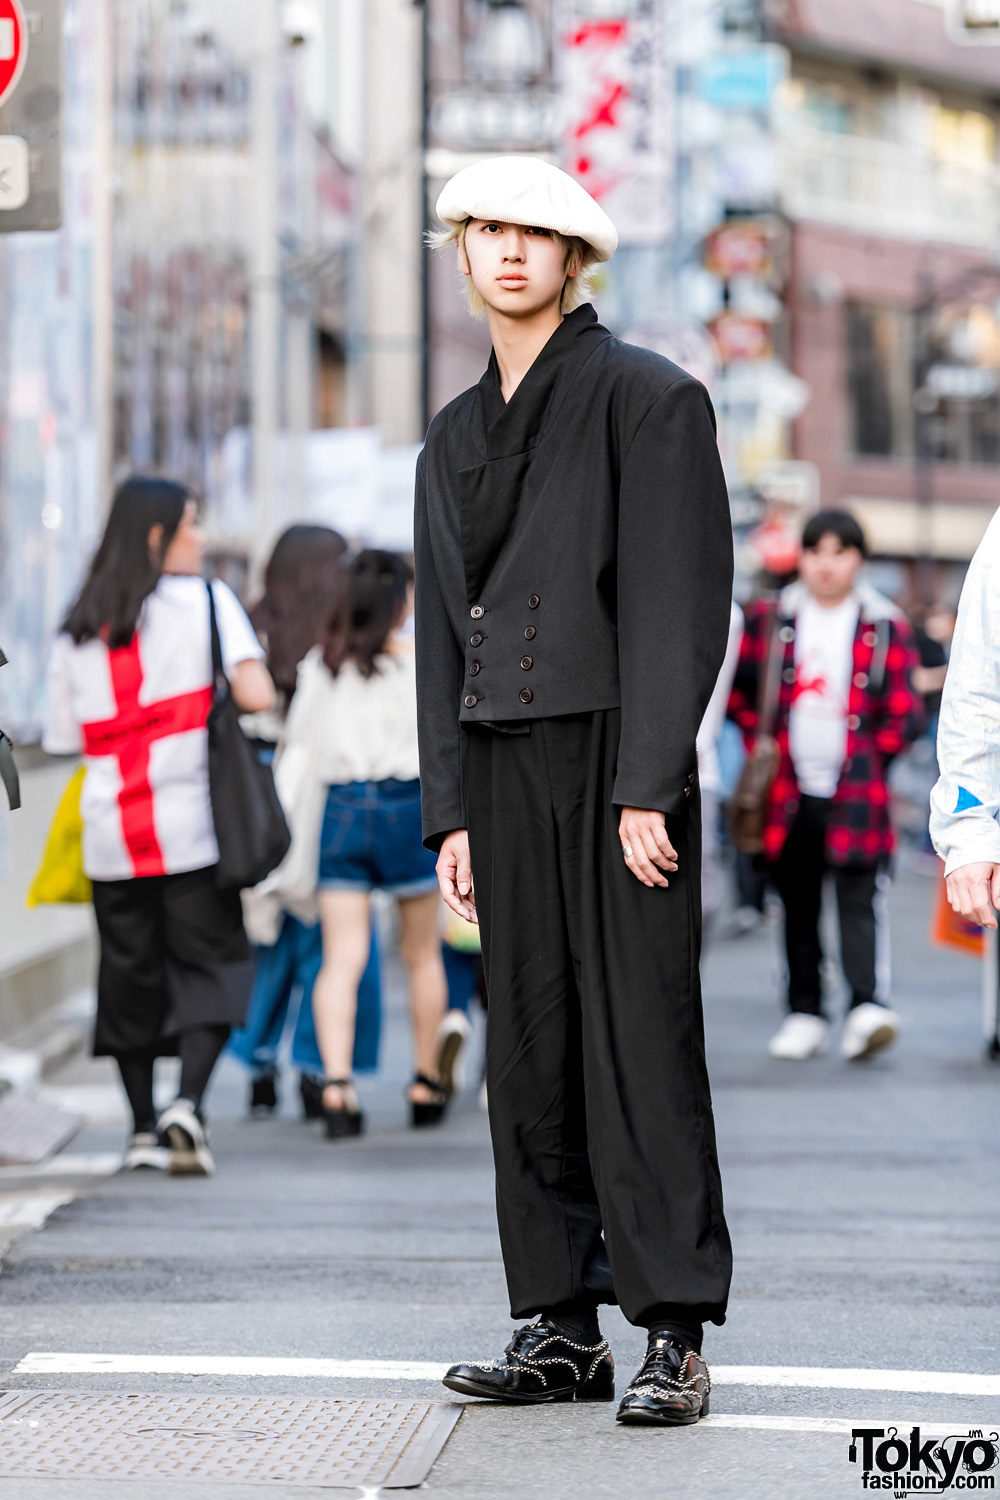 Tokyo Vintage Menswear Street Style w/ White Beret, Cropped Jacket & Studded Lace-Up Shoes